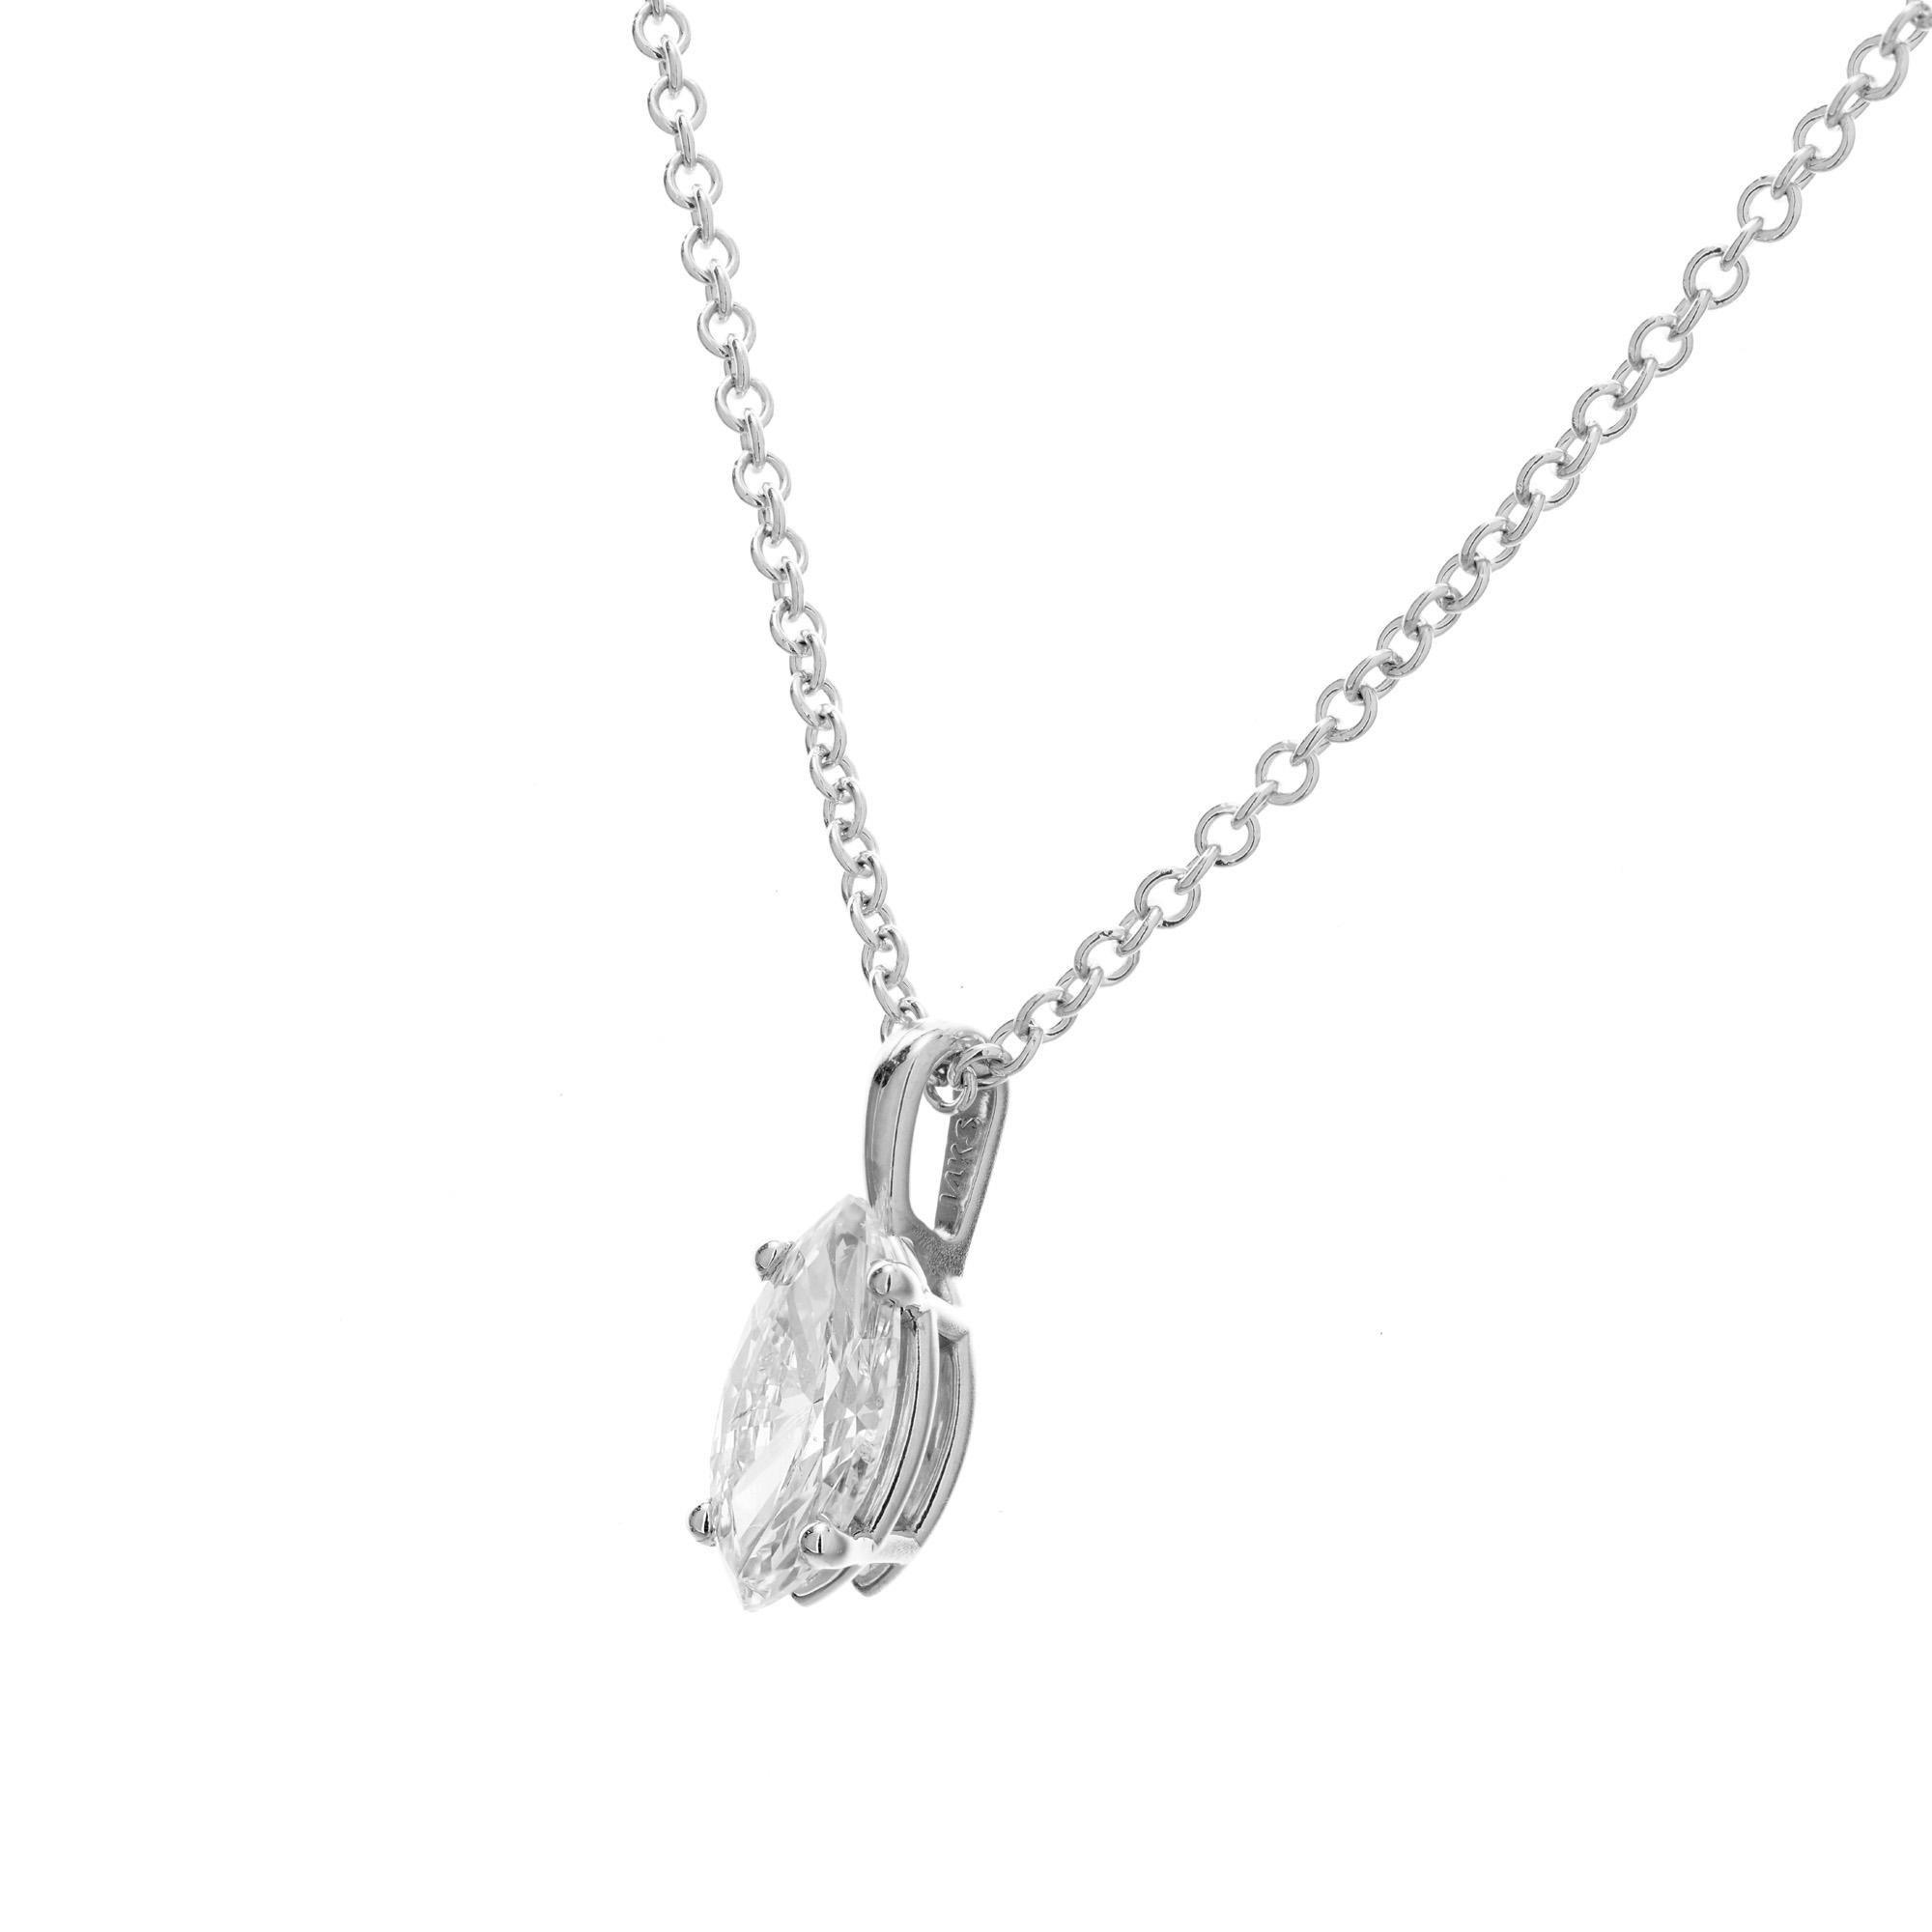 Marquise diamond pendant necklace. GIA certified marquise diamond set in a classic four prong 14k white gold basket setting. 16 inch 14k white gold chain. Designed and crafted in the Peter Suchy workshop

1 marquise cut diamond, H I approx. .60cts